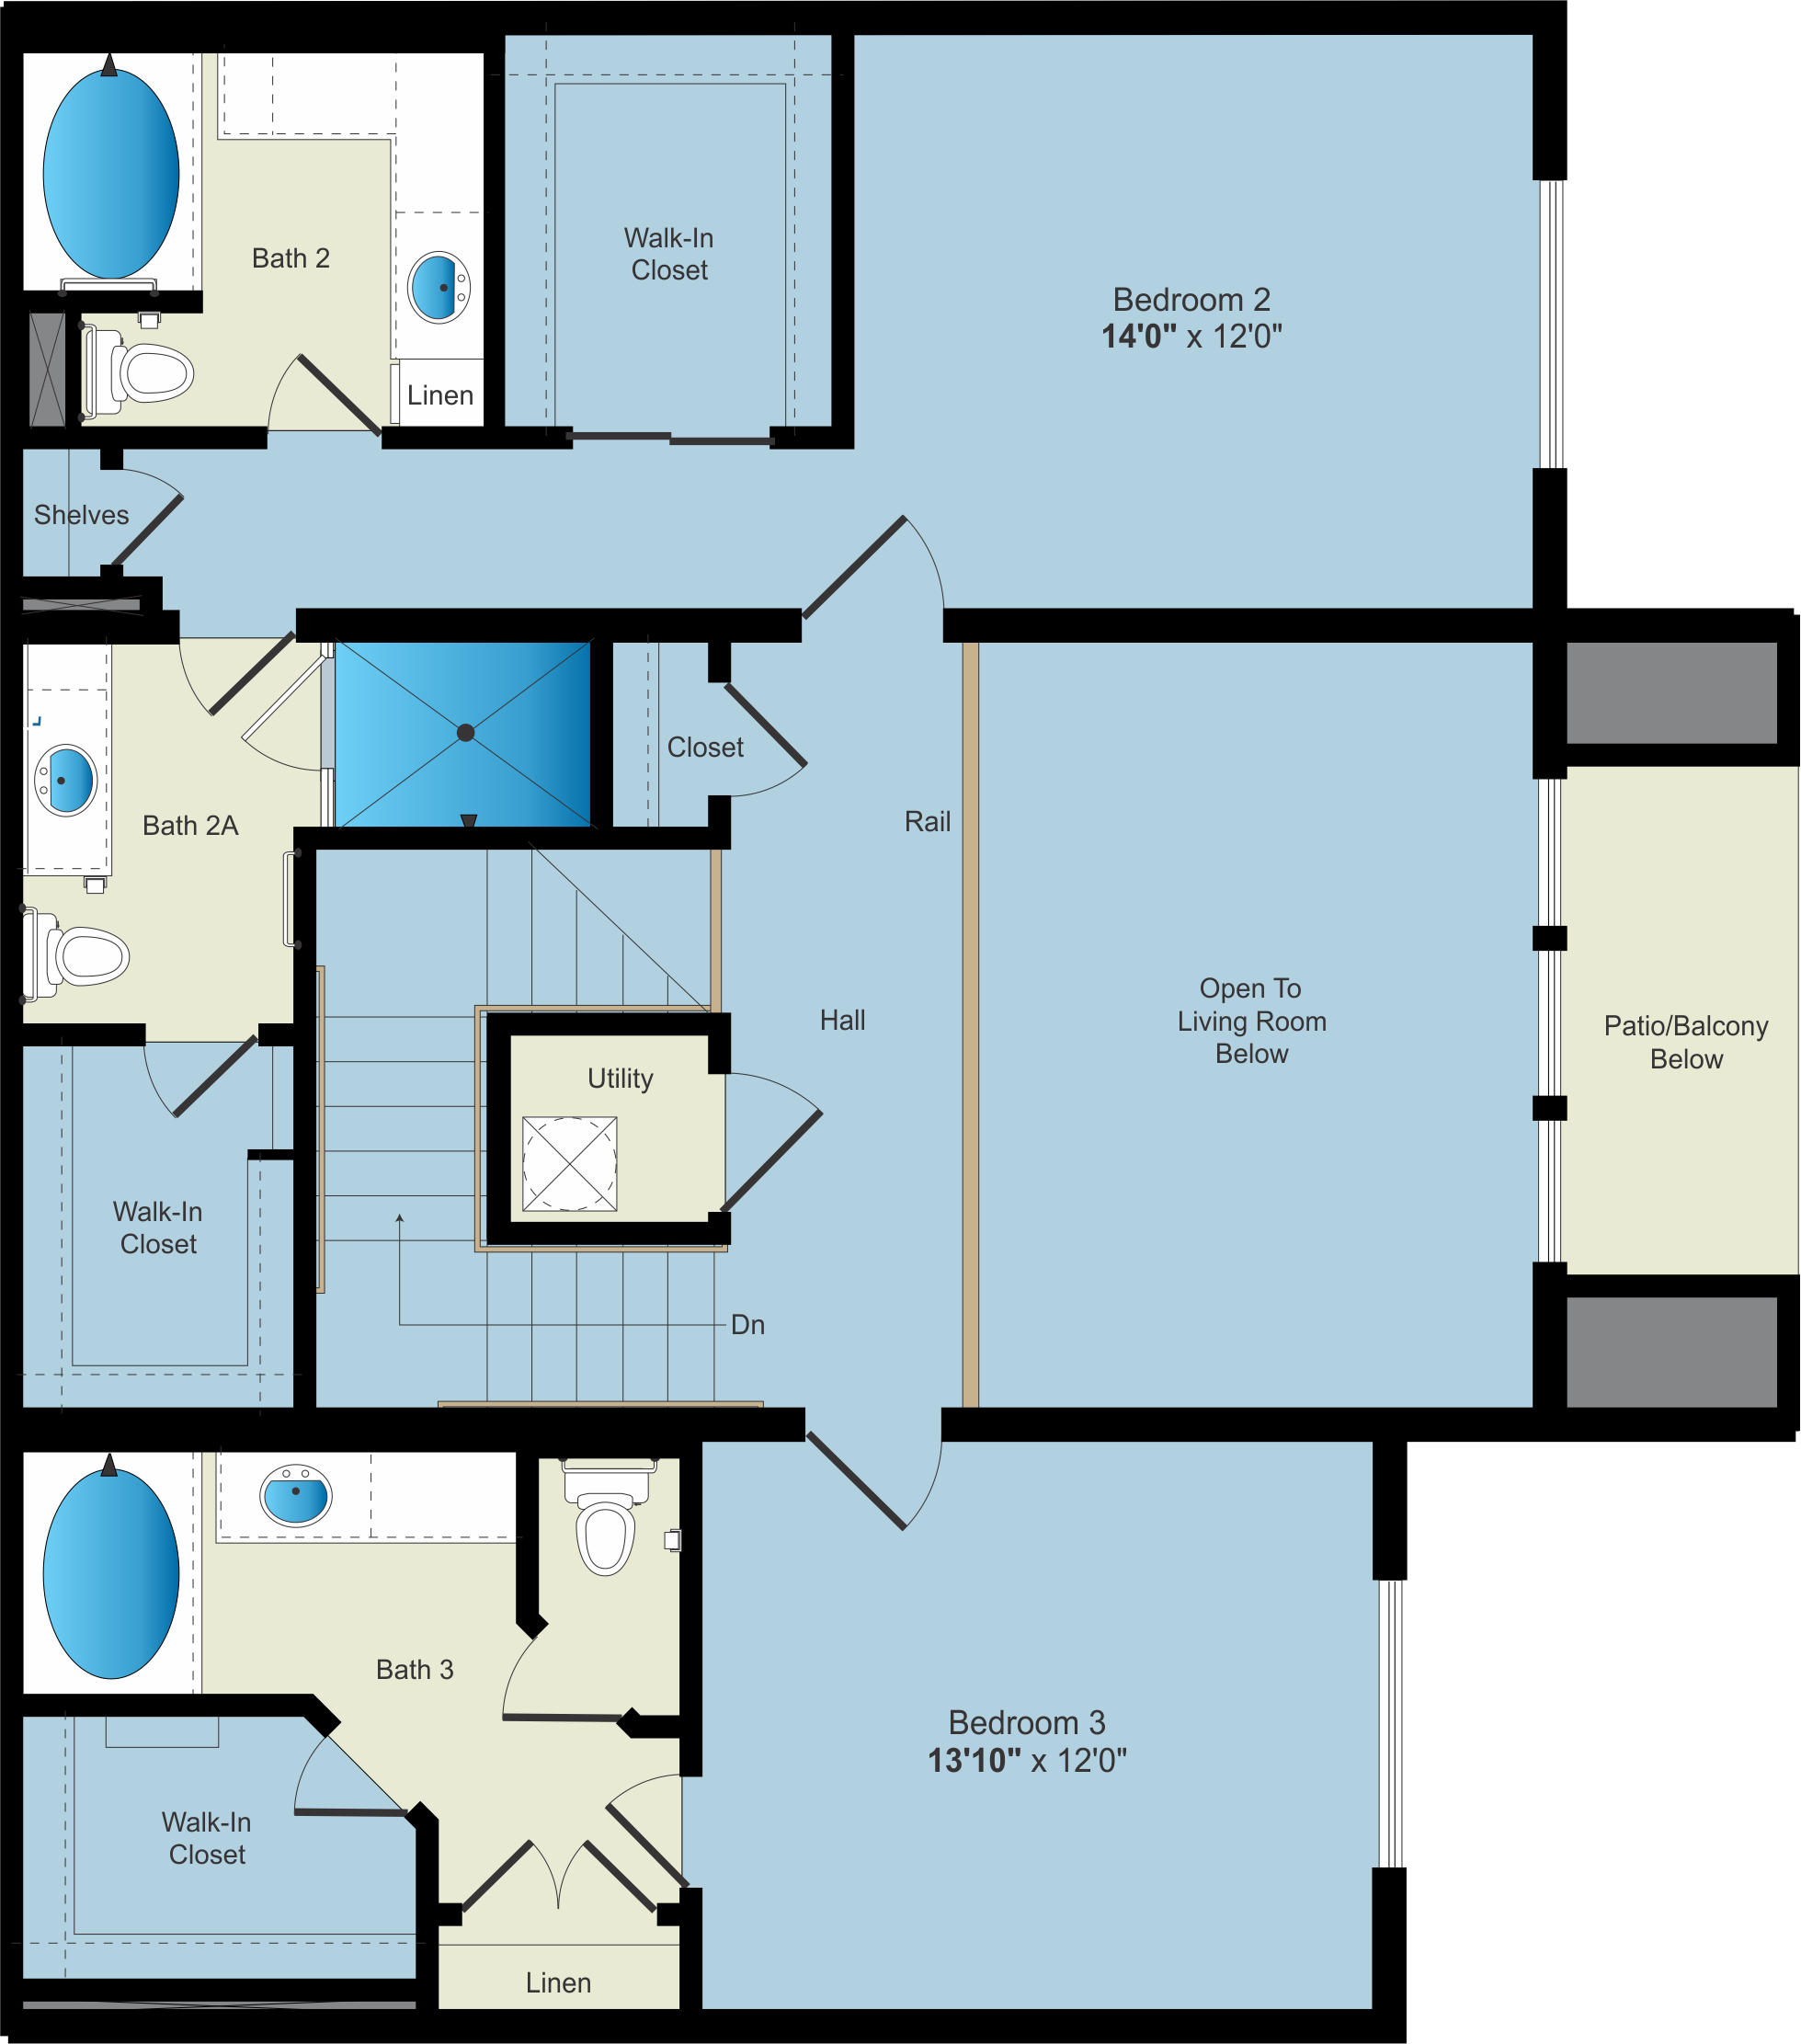 Apartment Rentals: A floor plan of an apartment with two bedrooms and two bathrooms.